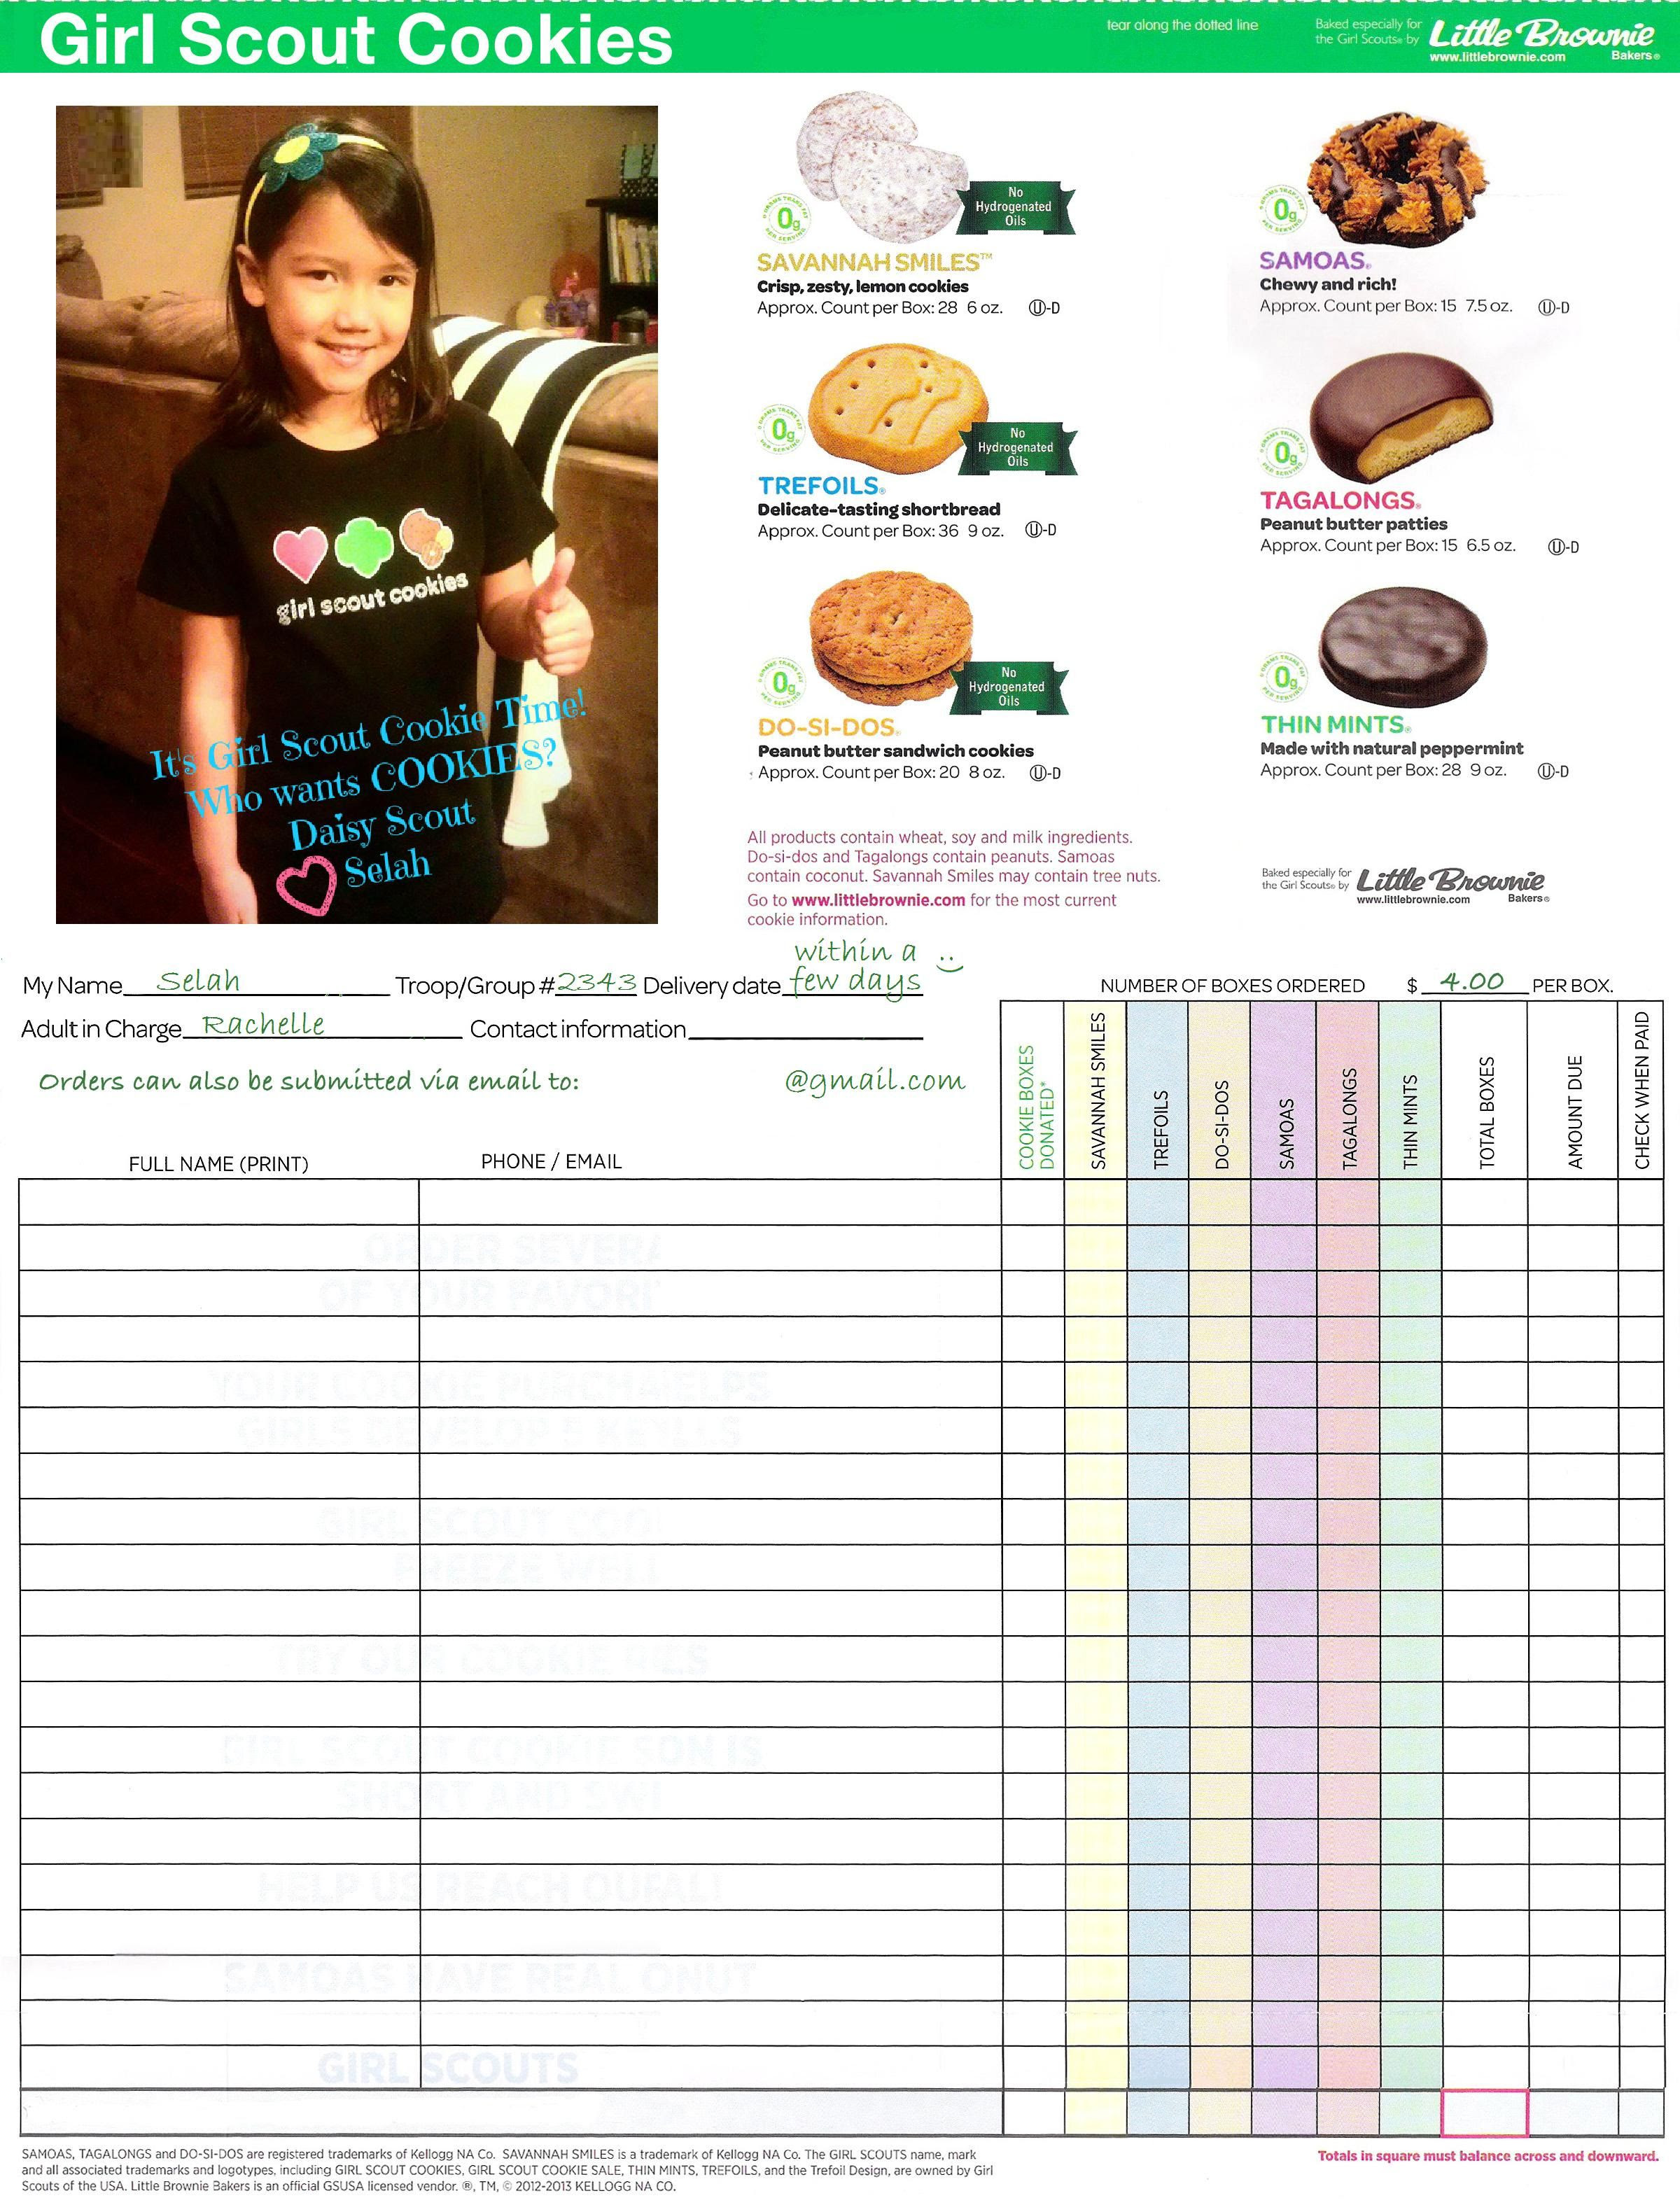 Girl Scout Cookie Personalized Order Form Girl scout cookie sales